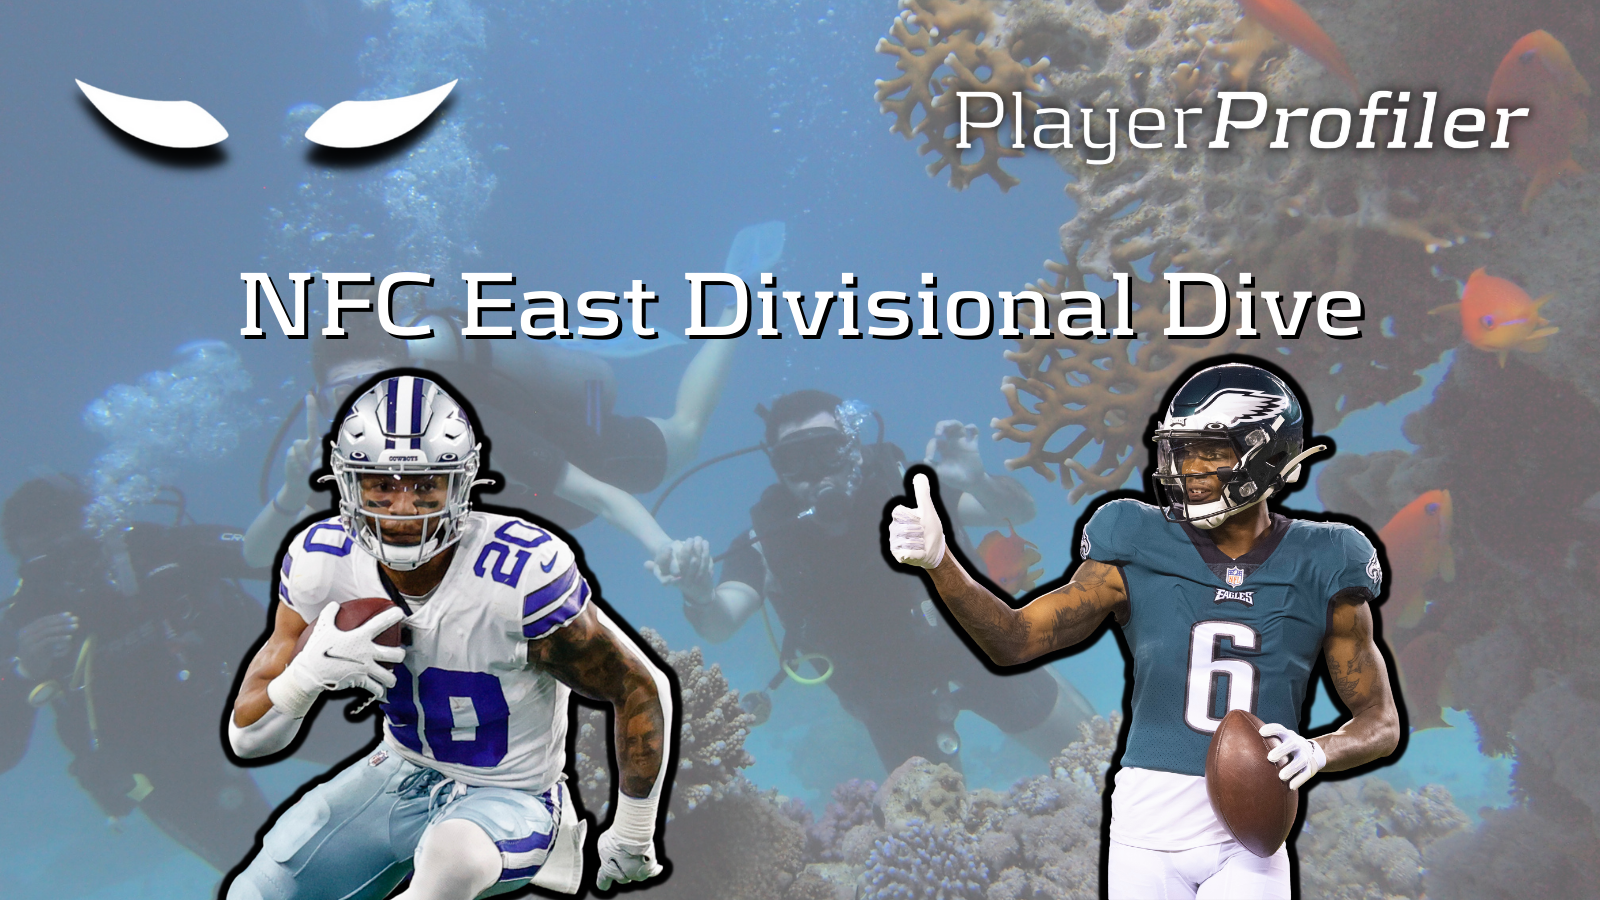 NFC East Divisional Dive